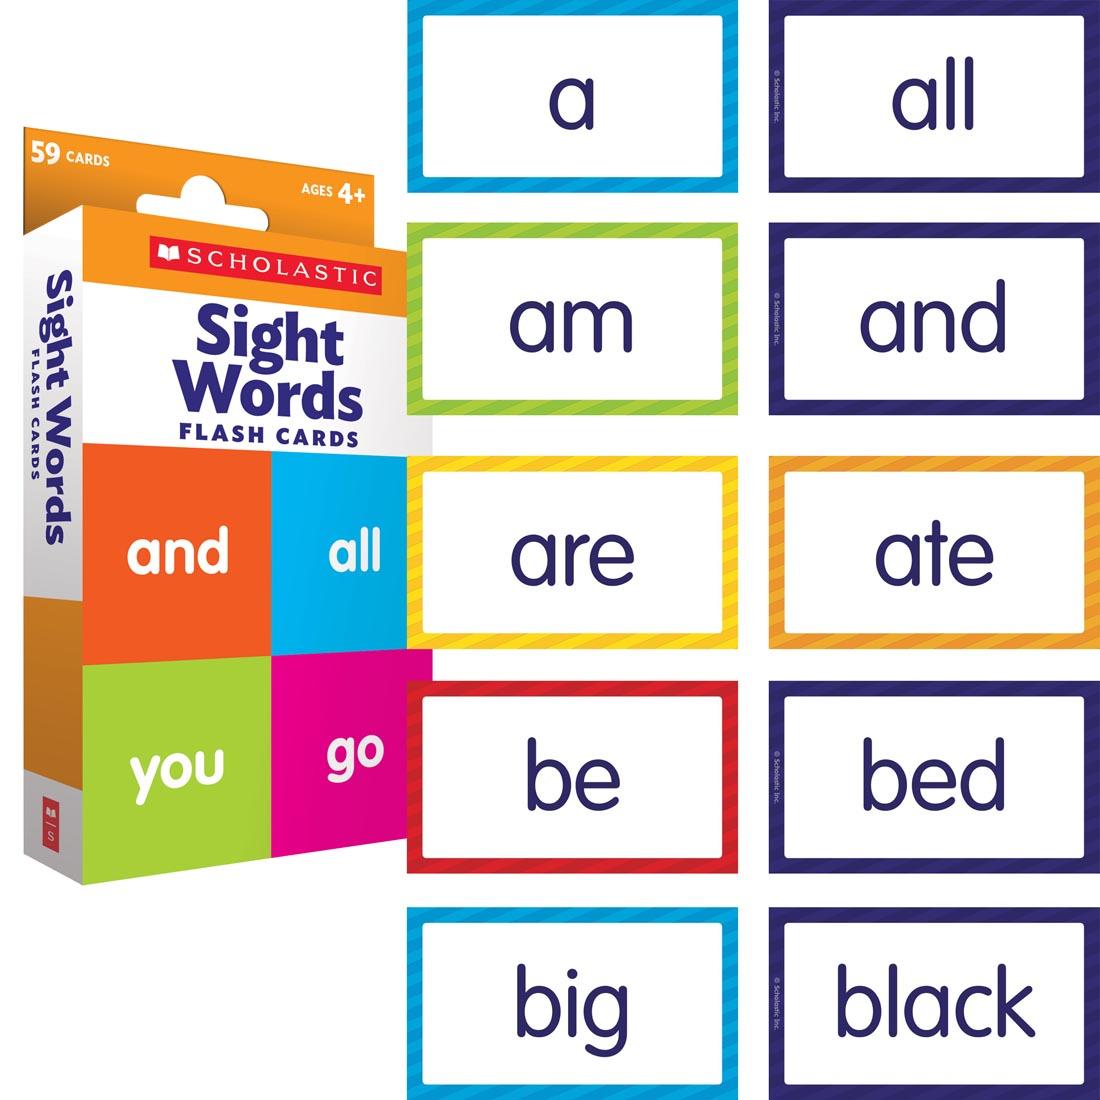 Box of Sight Words Flash Cards by Scholastic next to 10 sample cards